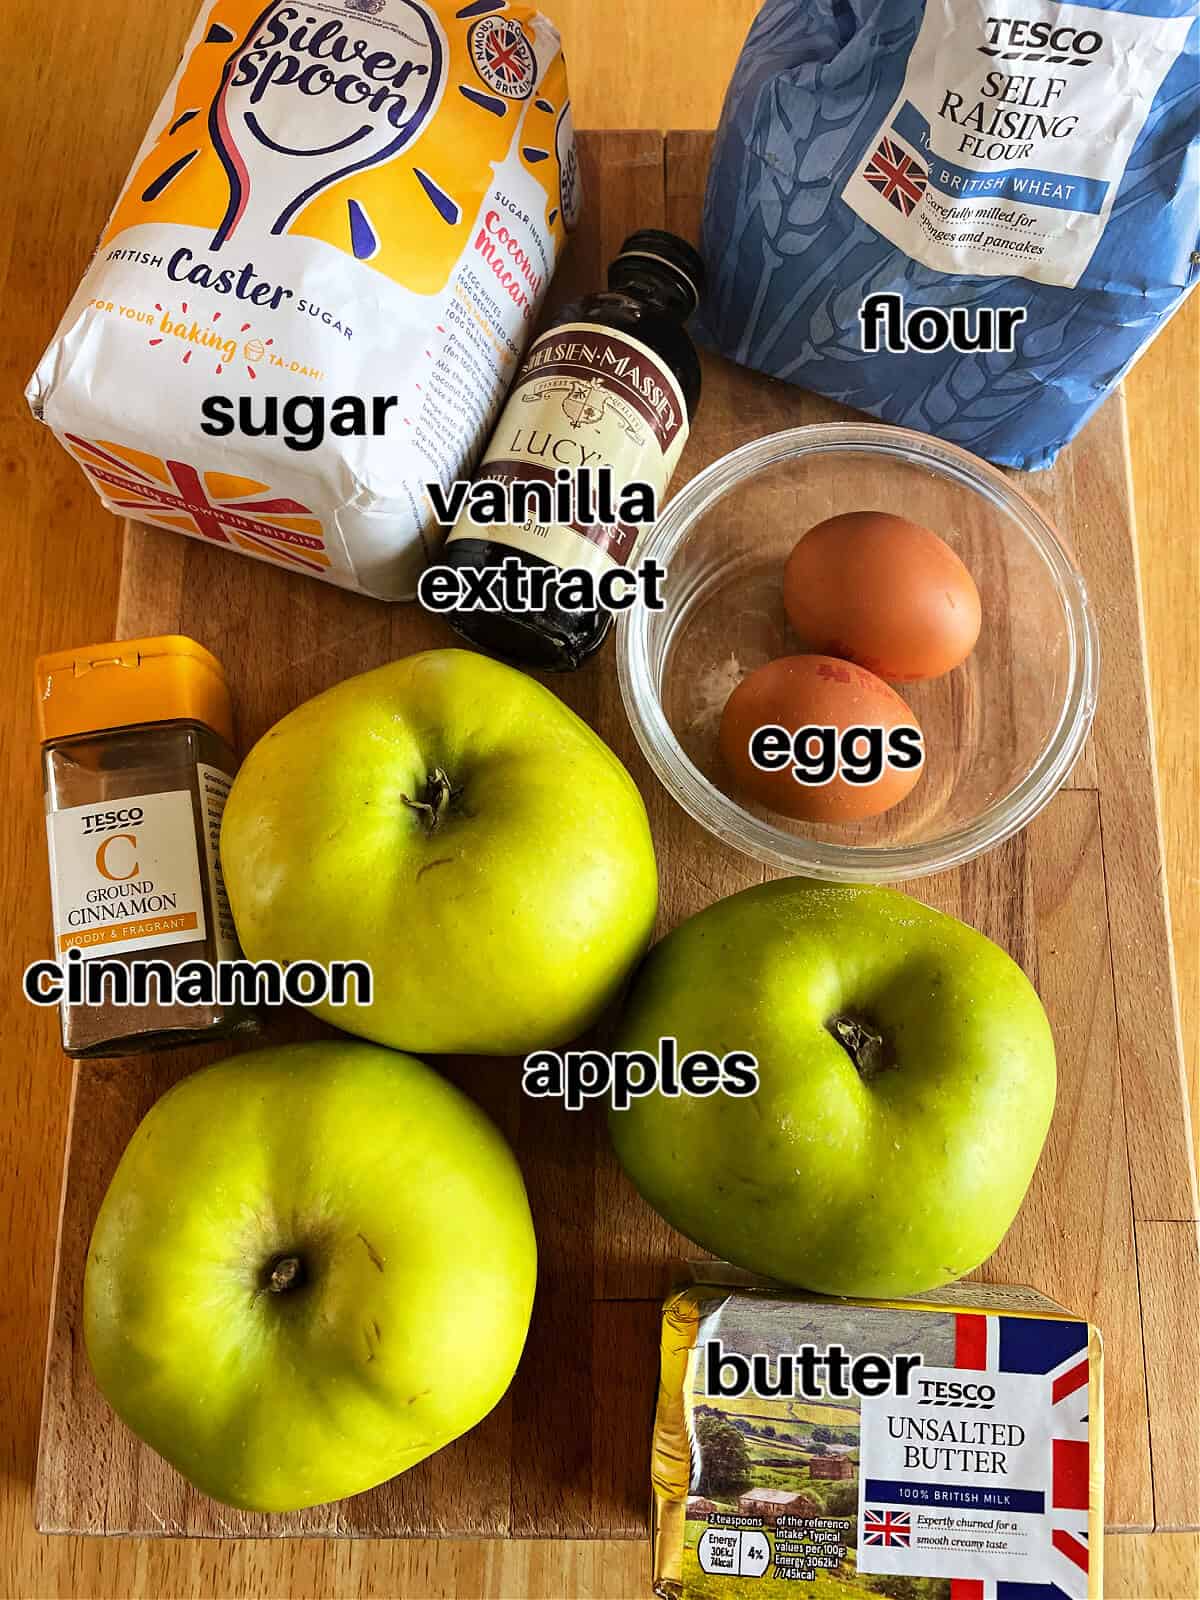 Ingredients for apple sponge pudding, with text labels.